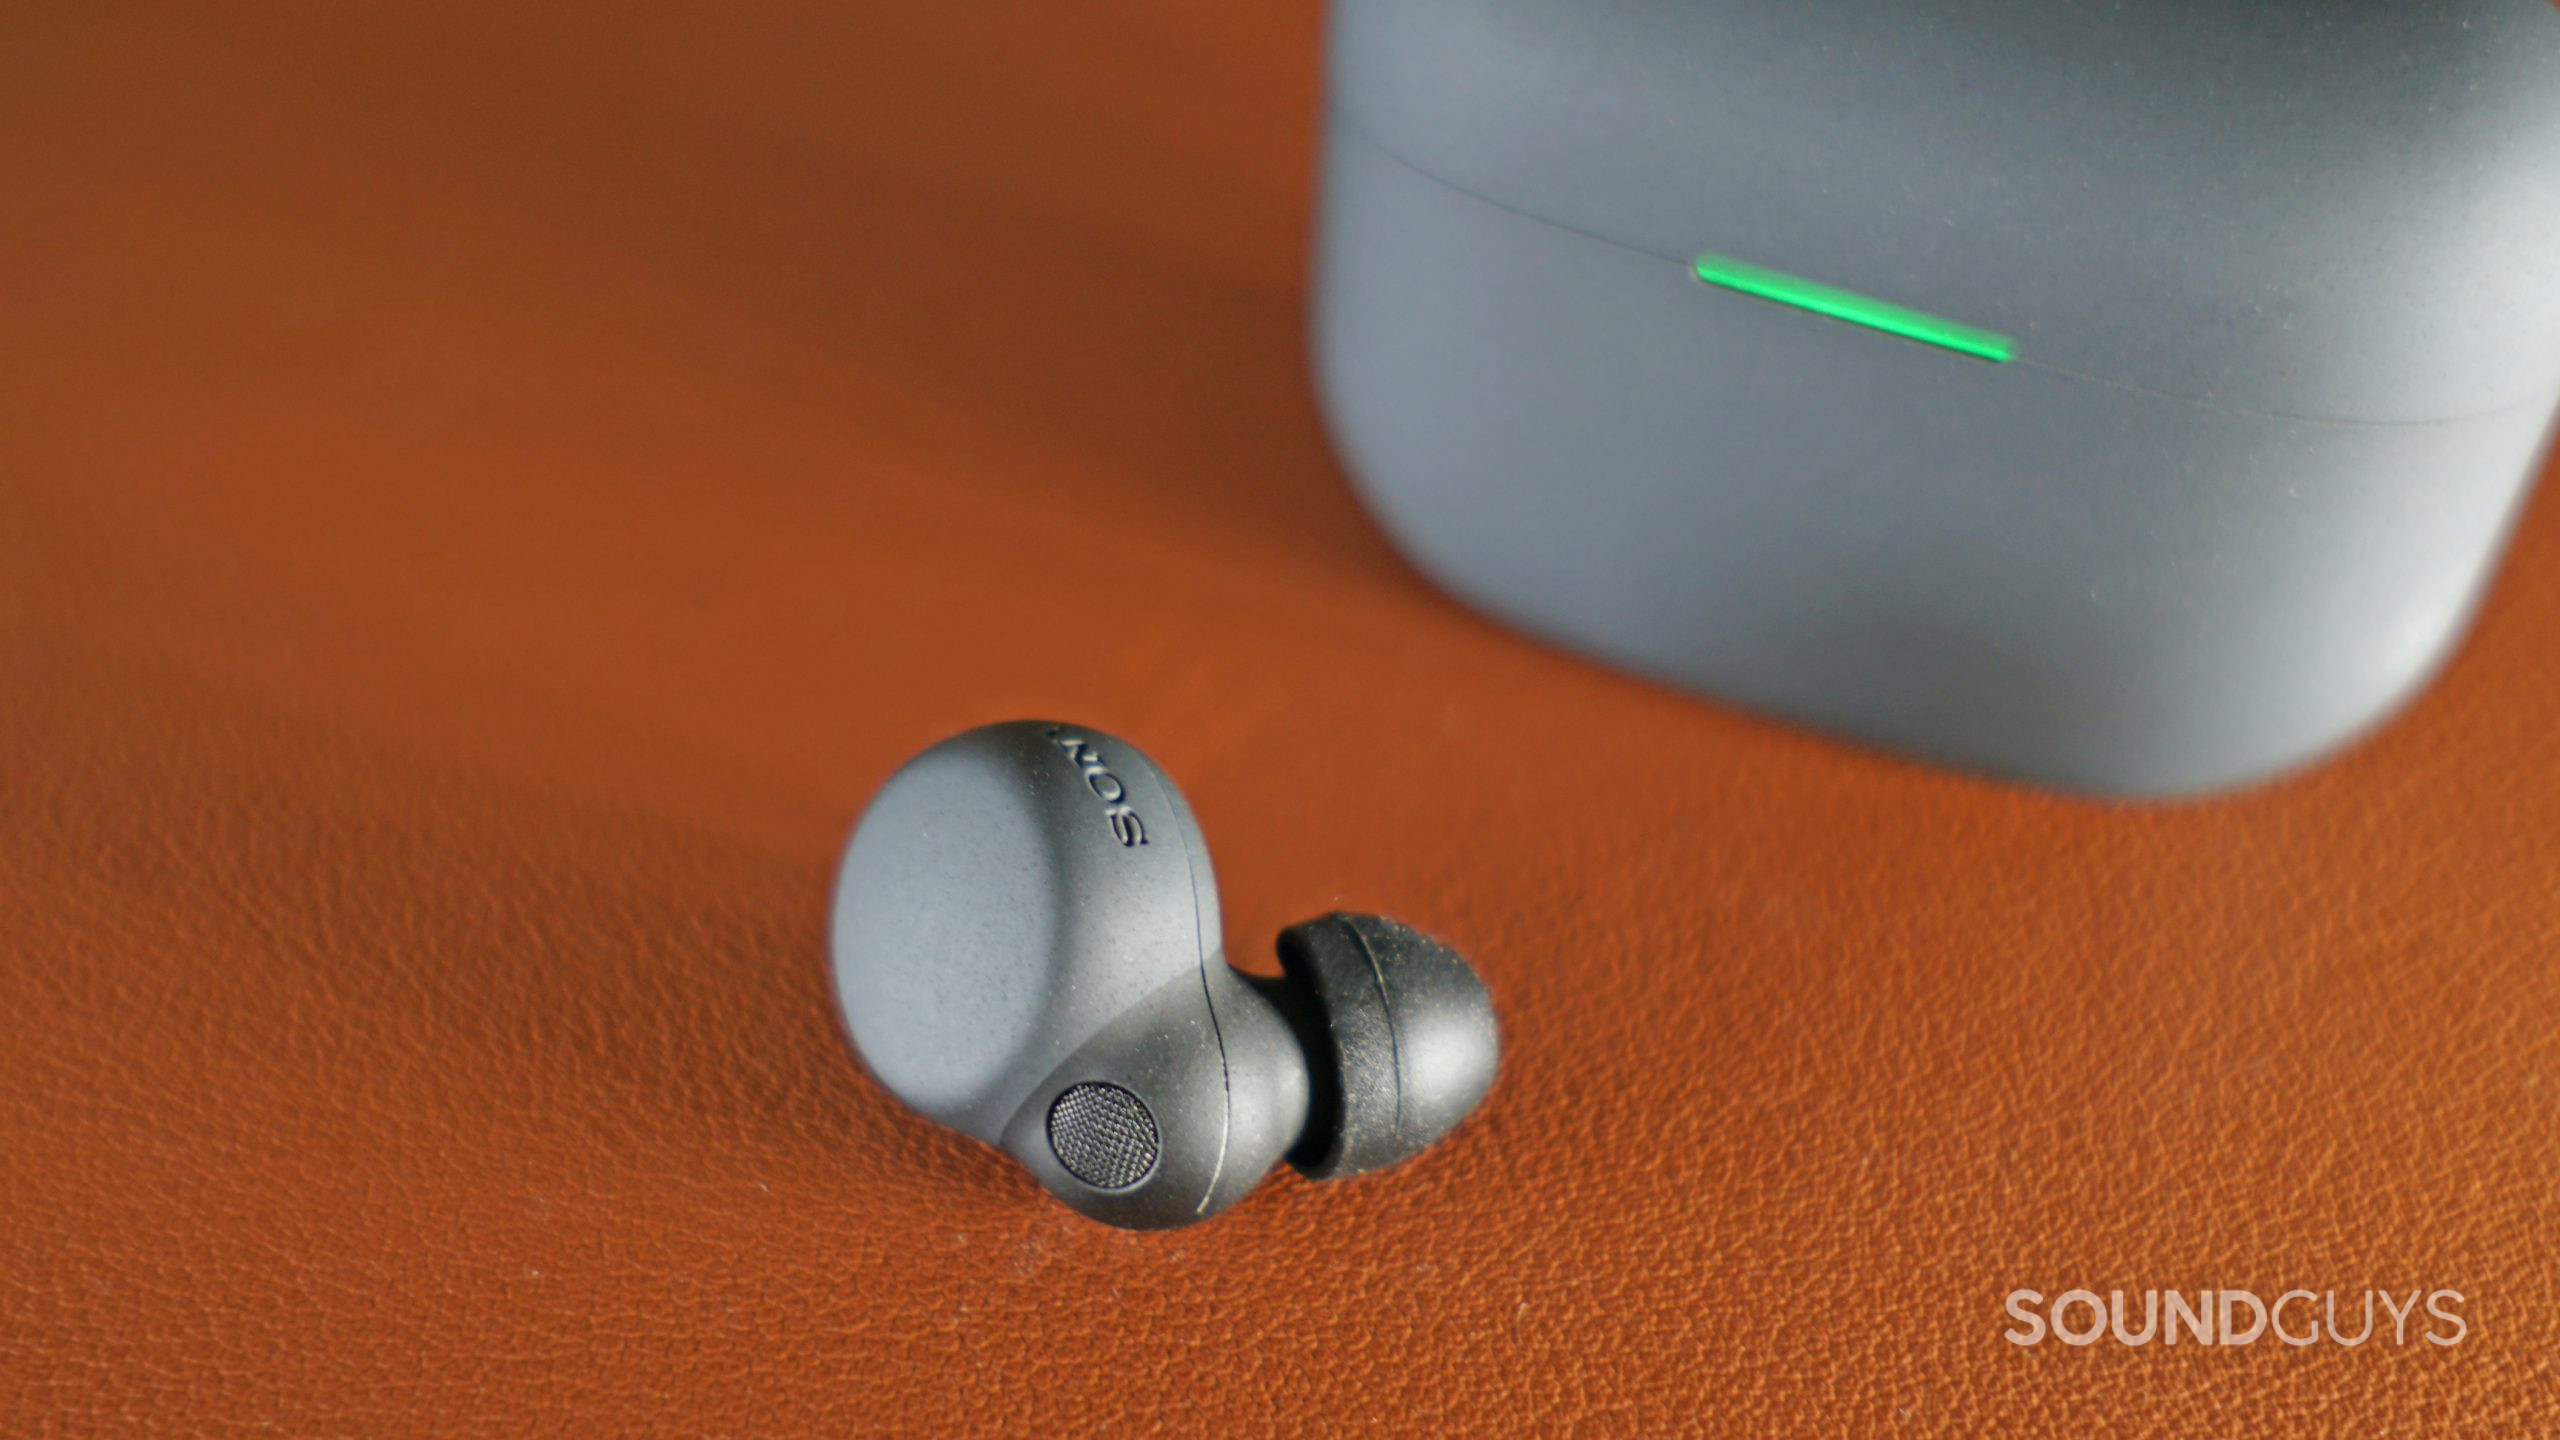 Sony WF-1000XM4 review: Top-tier ANC earbuds - SoundGuys